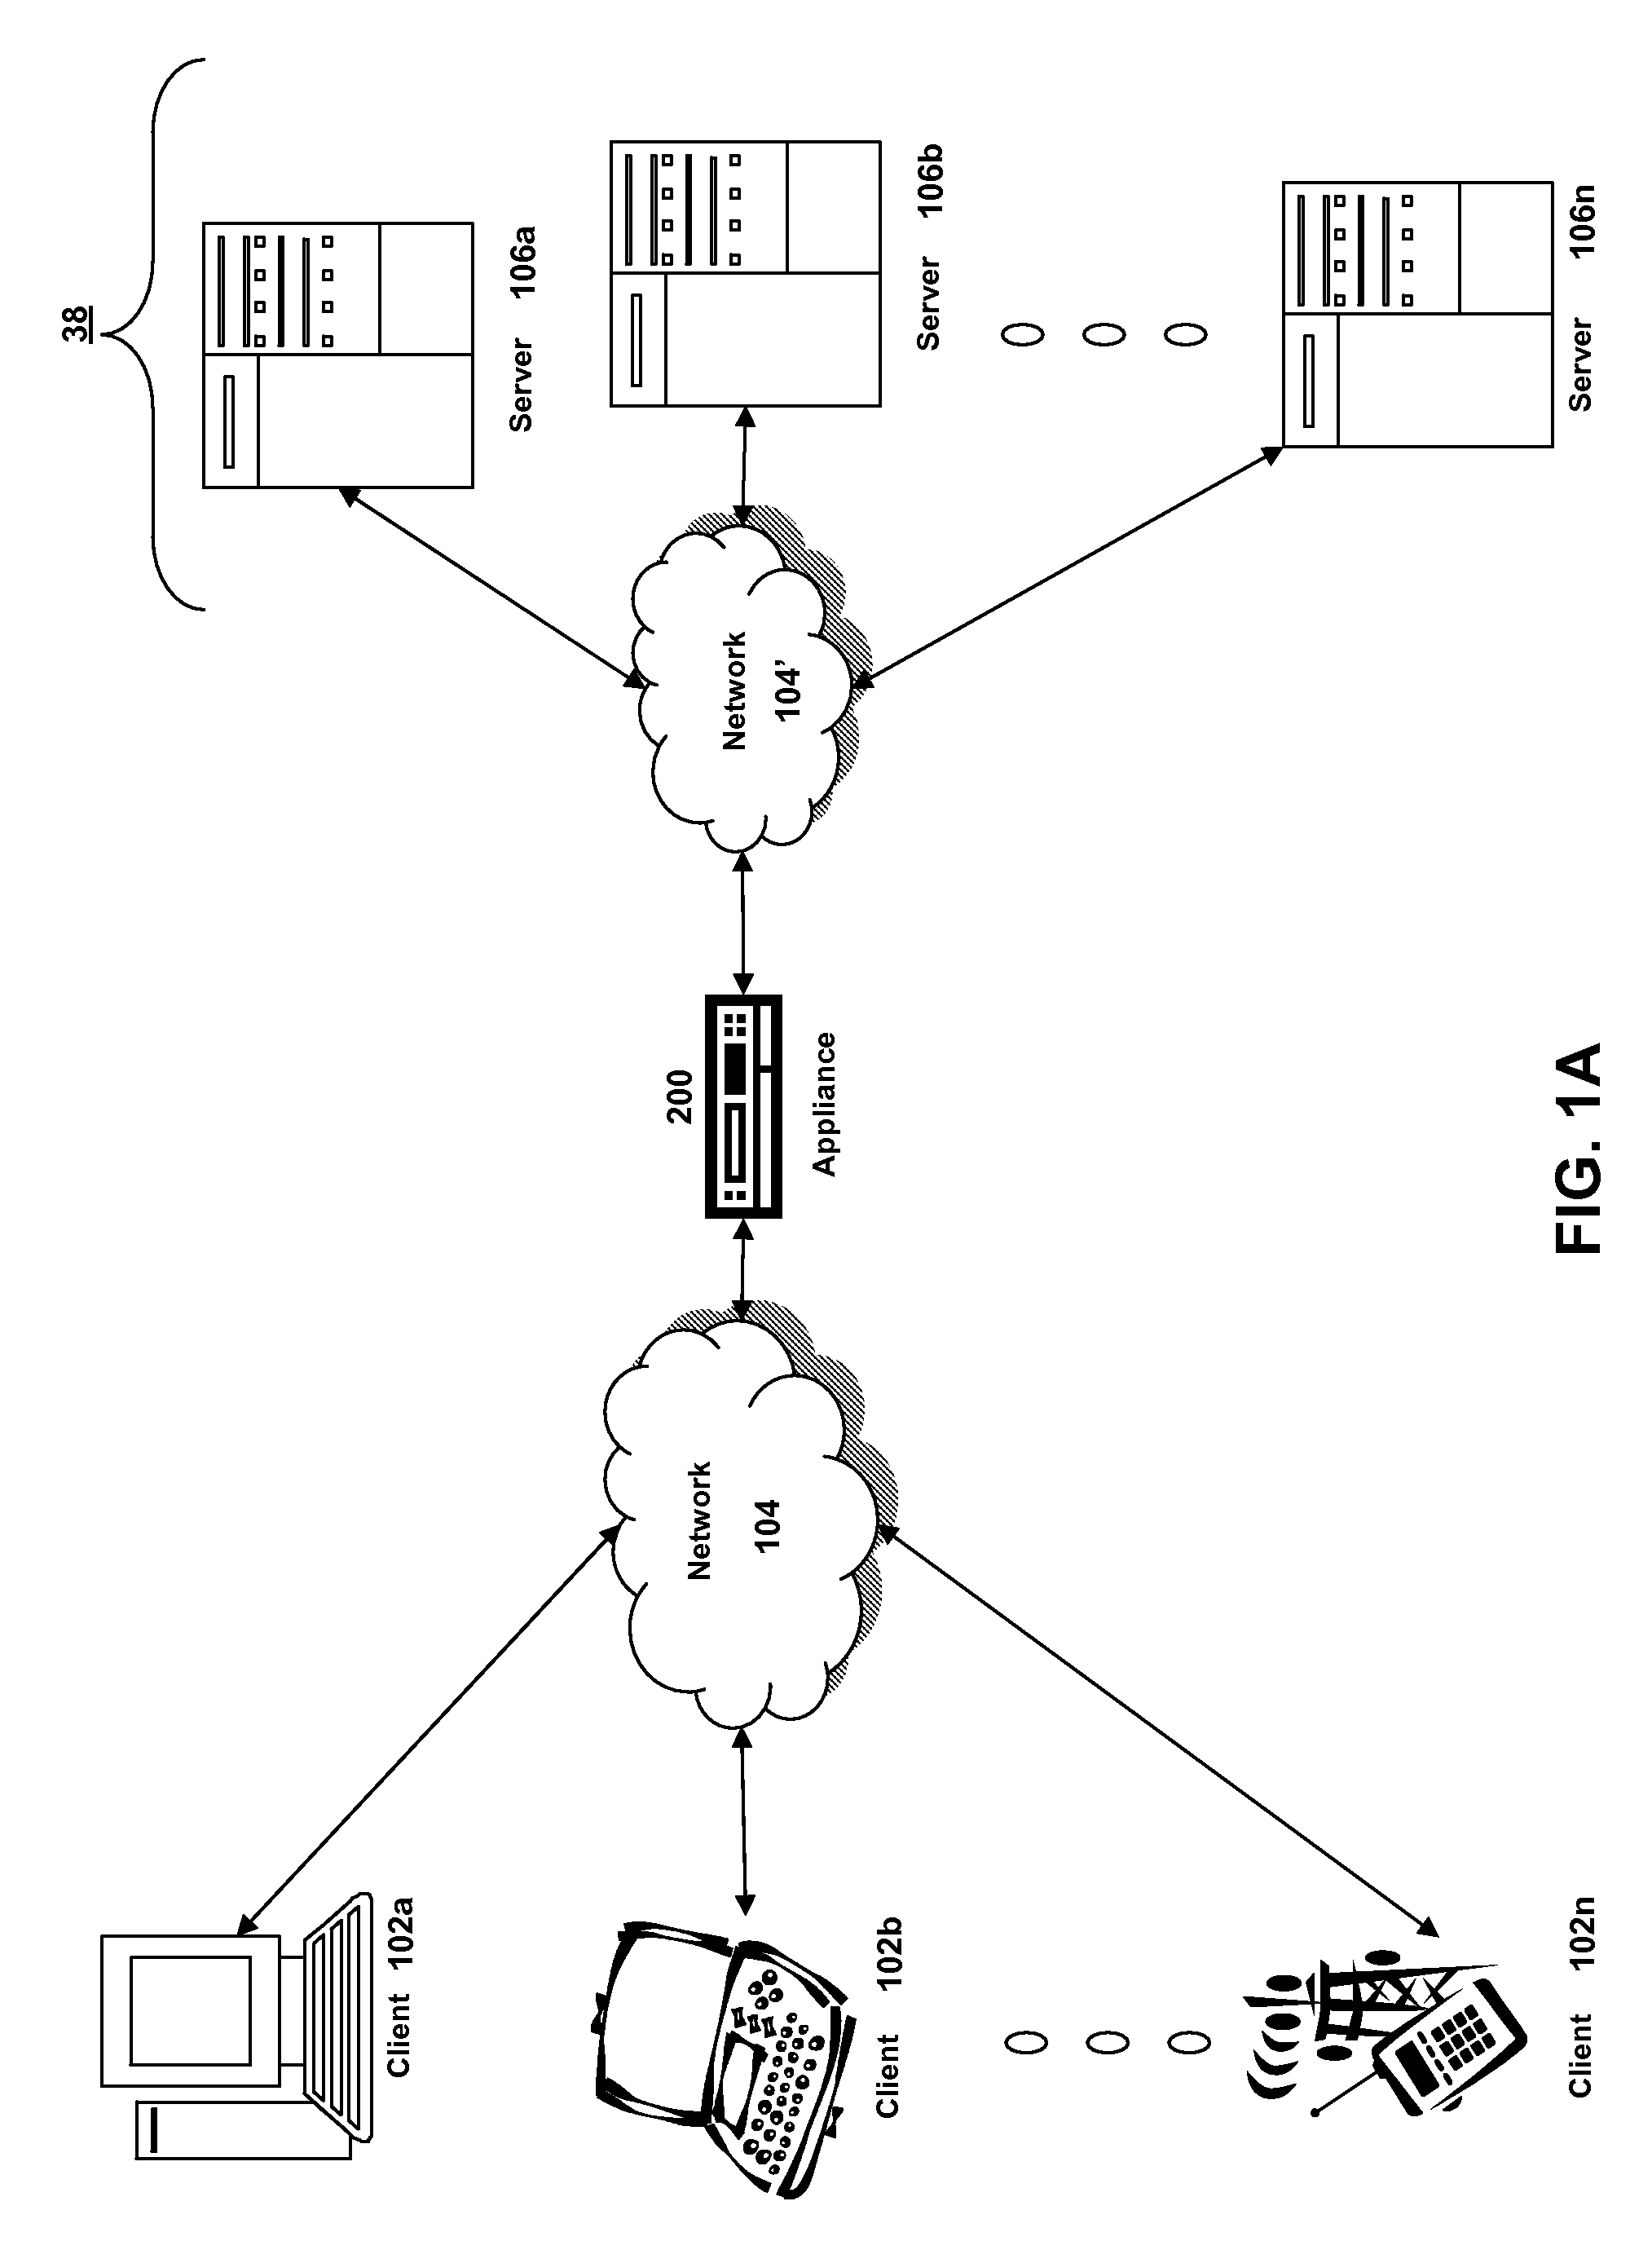 Systems and Methods for Providing Dynamic Spillover of Virtual Servers Based on Bandwidth